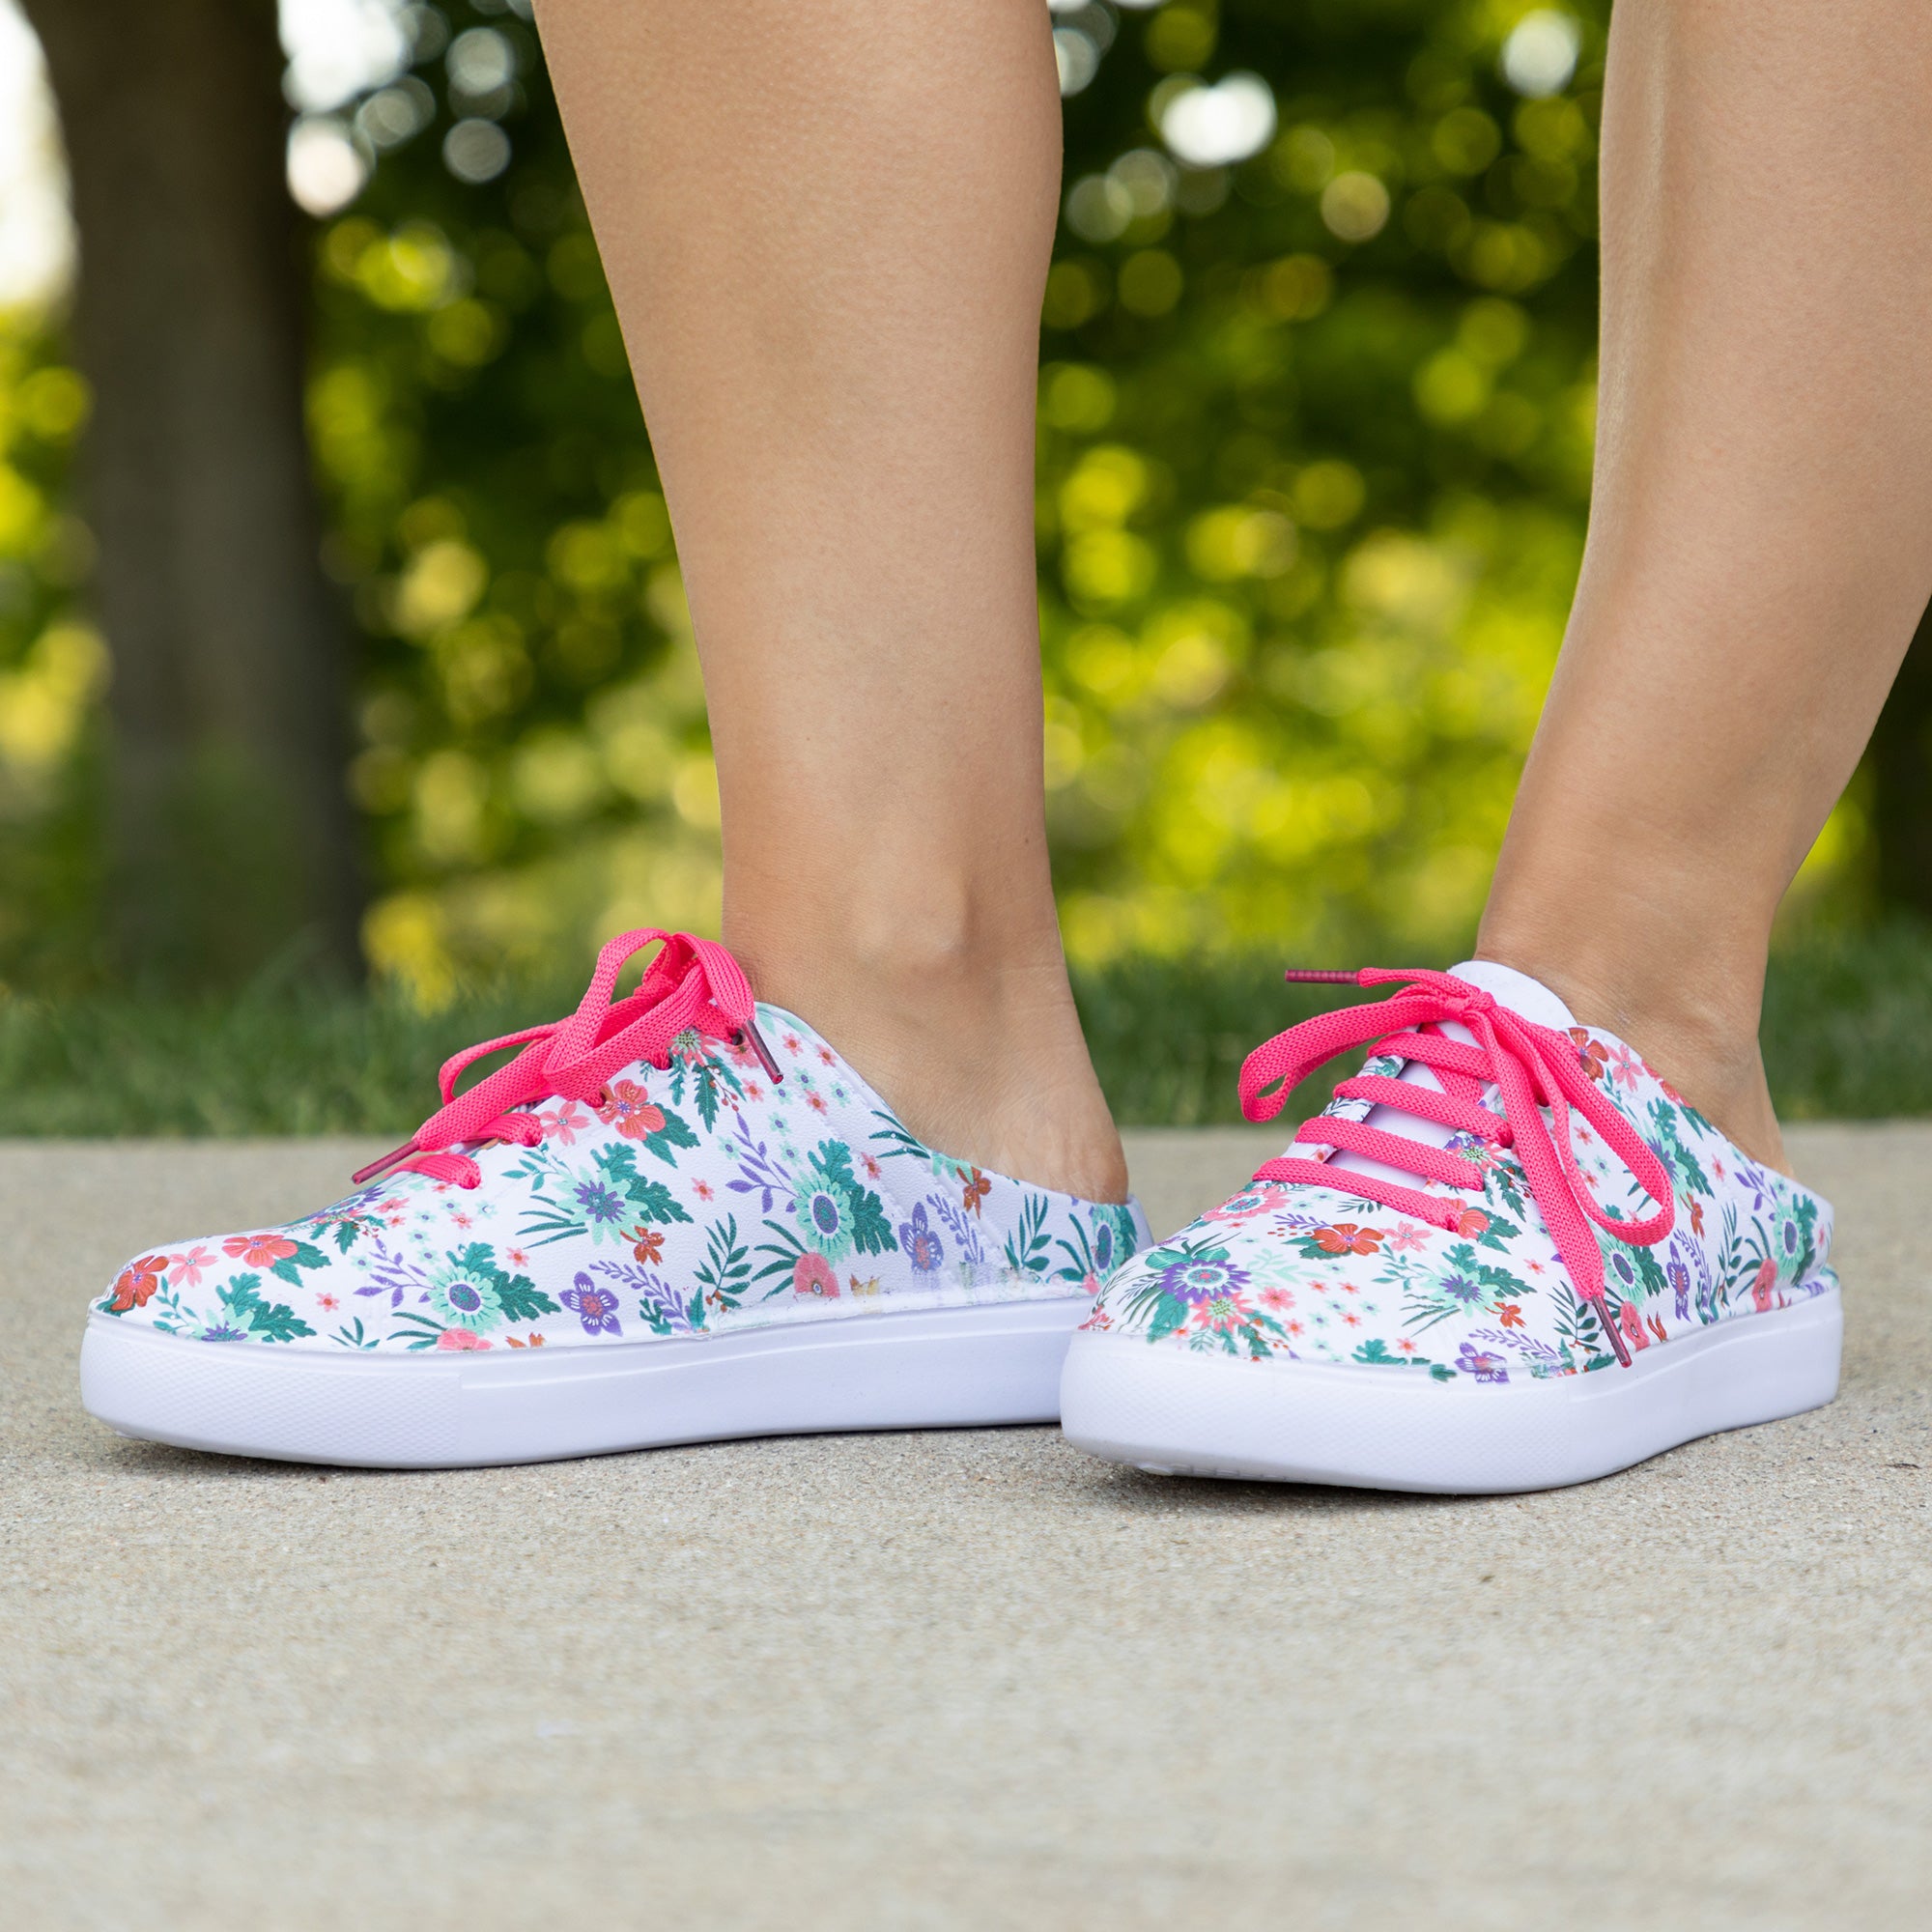 Women's Paw Print Lace-Up Mule Sneakers - Floral - 8